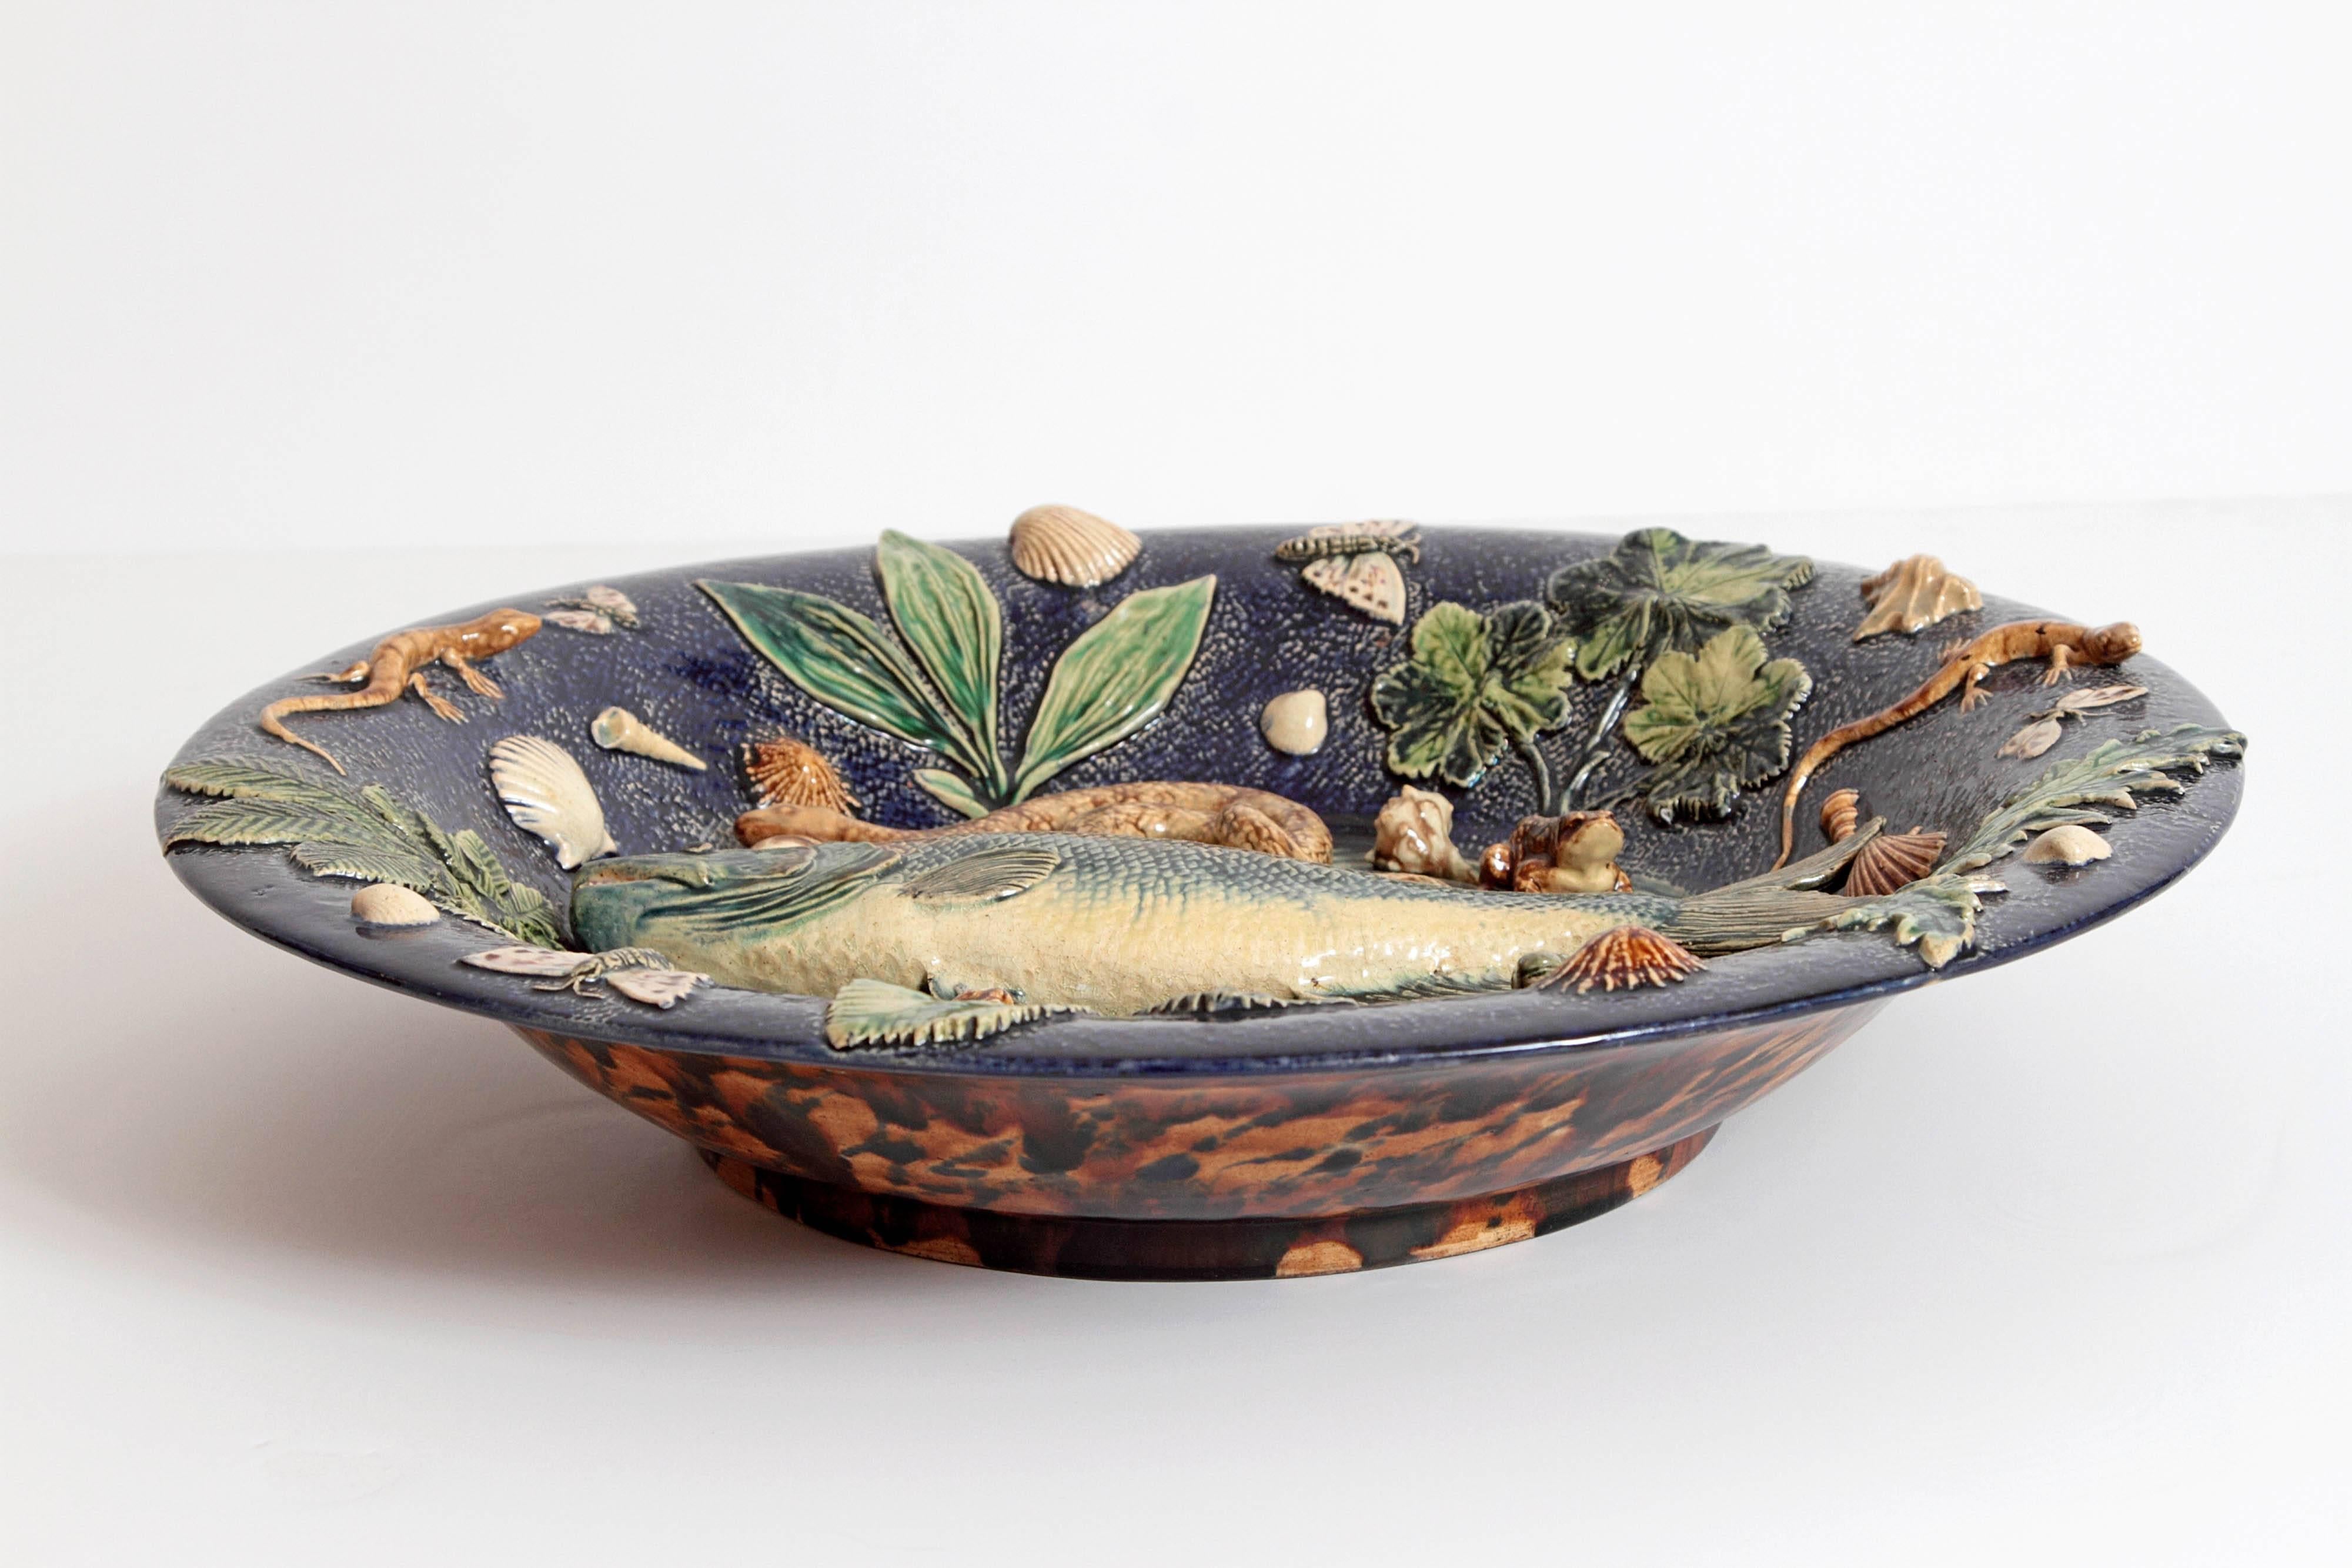 Large Palissy charger composed of a central trout, snakes, frogs, moths, shells and leaves on a cobalt ground, signed by Victor Barbizet.
France, circa 1875.
 
May be displayed on a table, a stand, or hung on a wall.